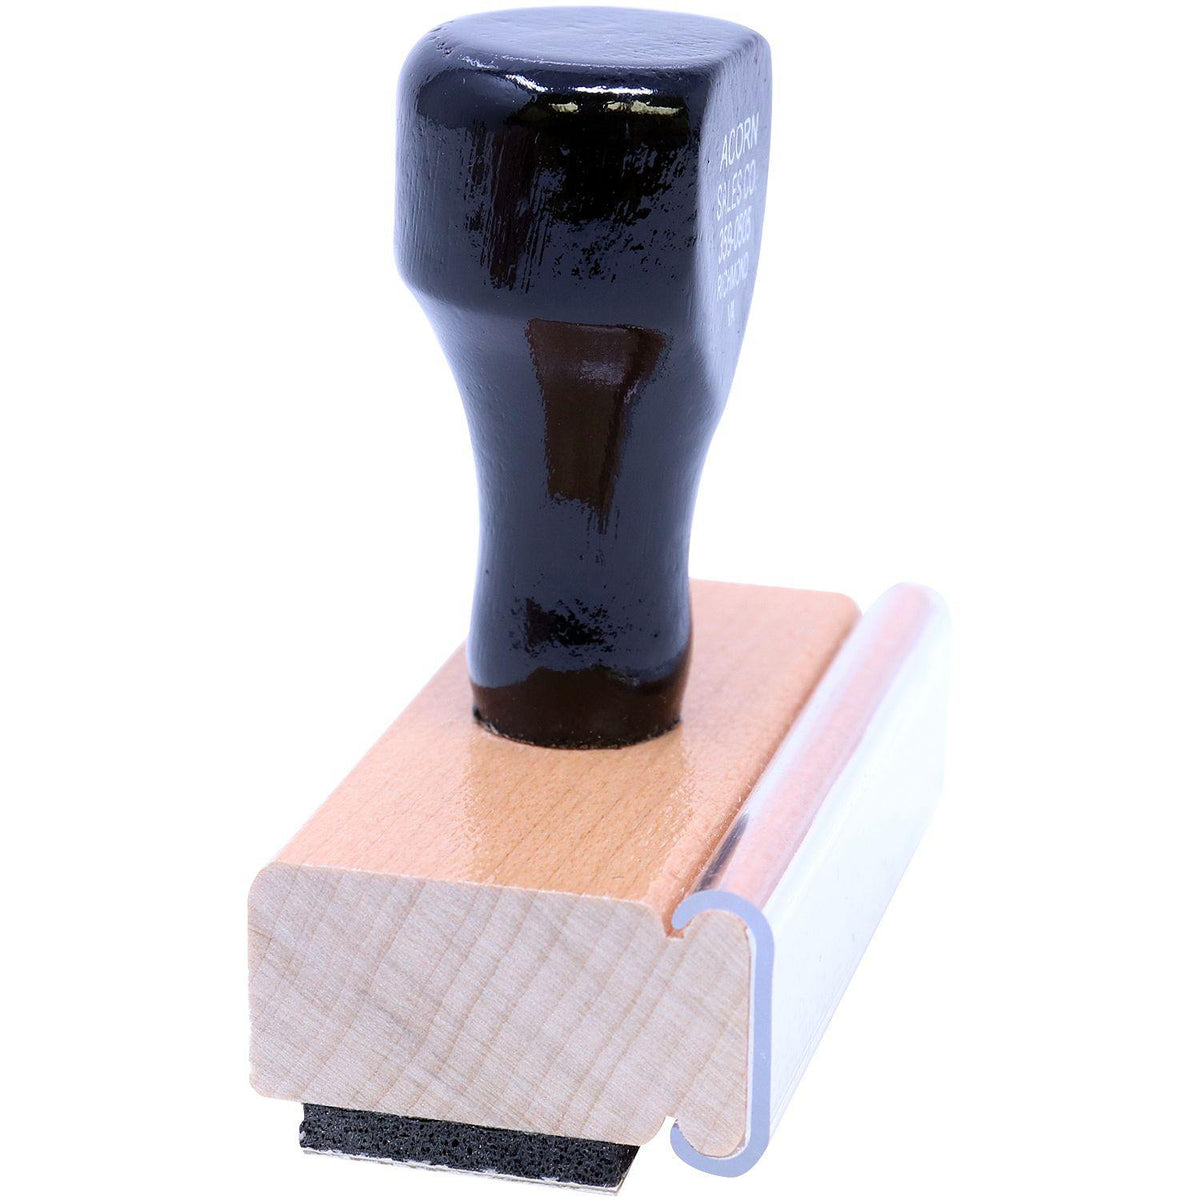 Large Smoker Rubber Stamp - Engineer Seal Stamps - Brand_Acorn, Impression Size_Large, Stamp Type_Regular Stamp, Type of Use_Medical Office